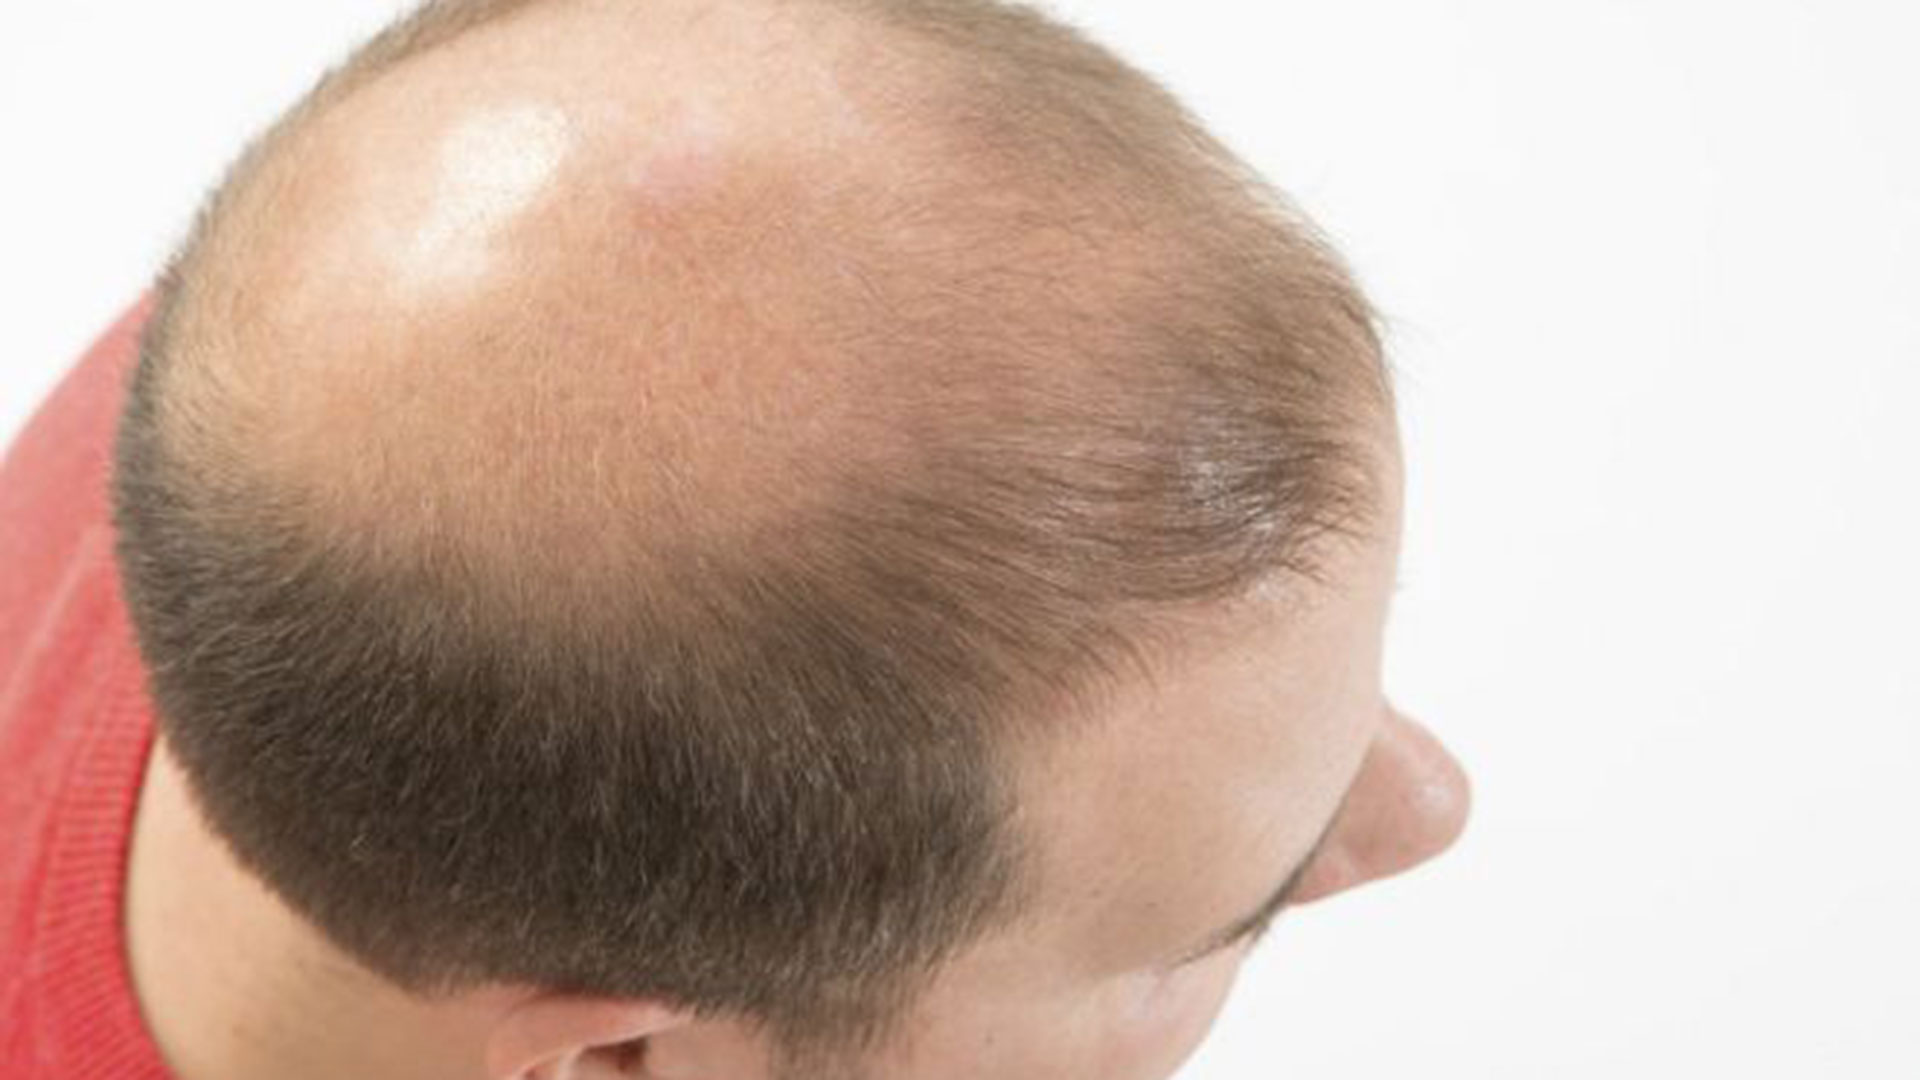 The judges said that suffering from baldness can be emotionally devastating for a man so it is not okay to comment on his physical appearance. 